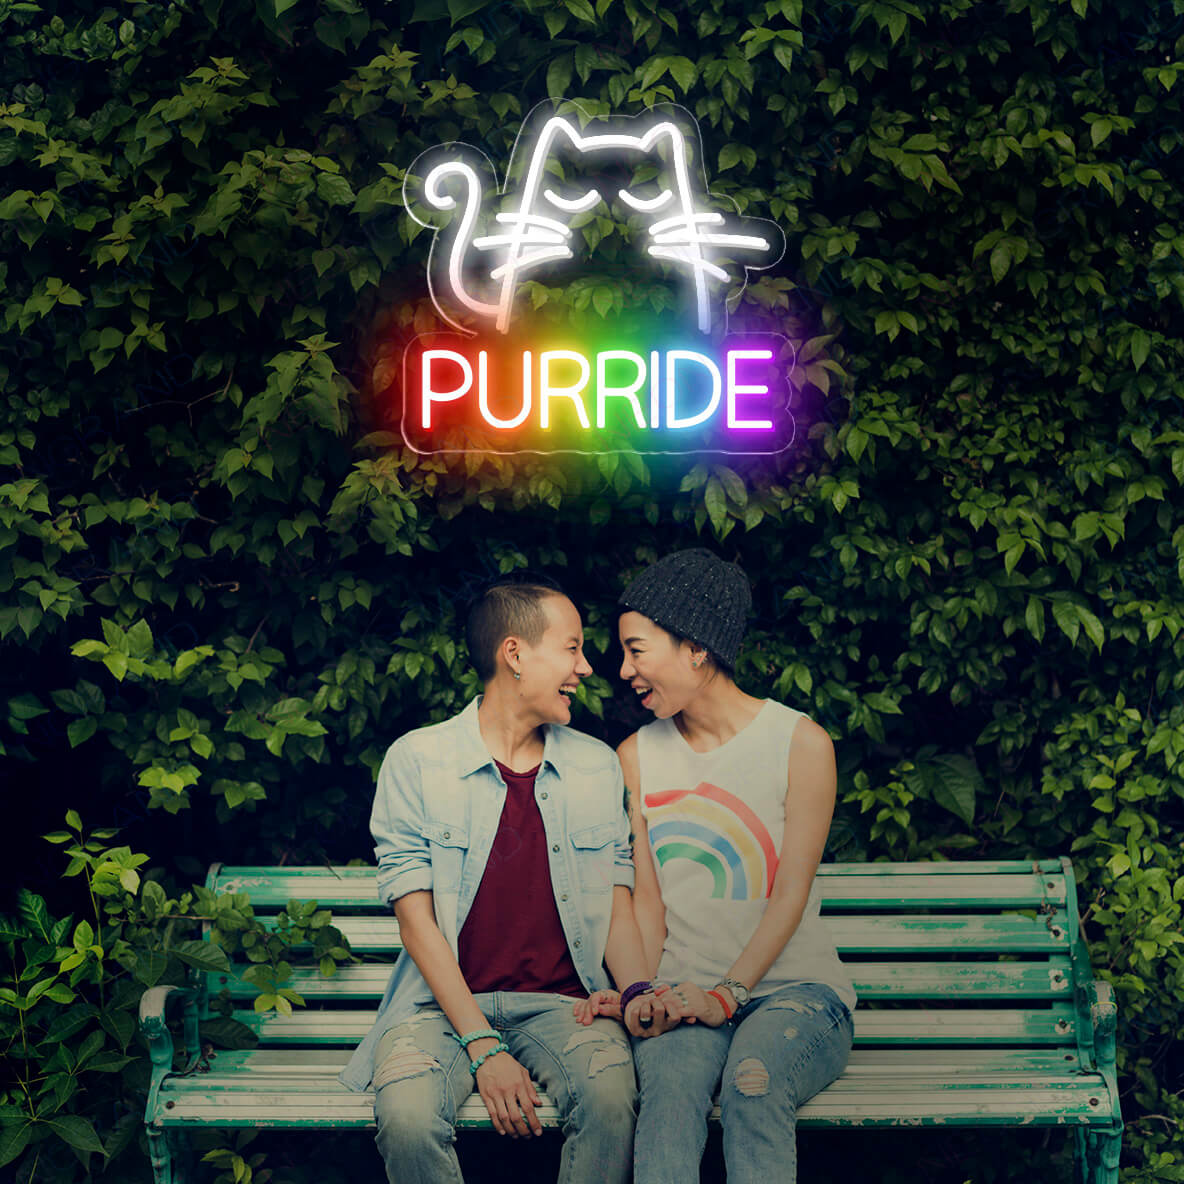 LGBT Neon Light Purride Led Sign a